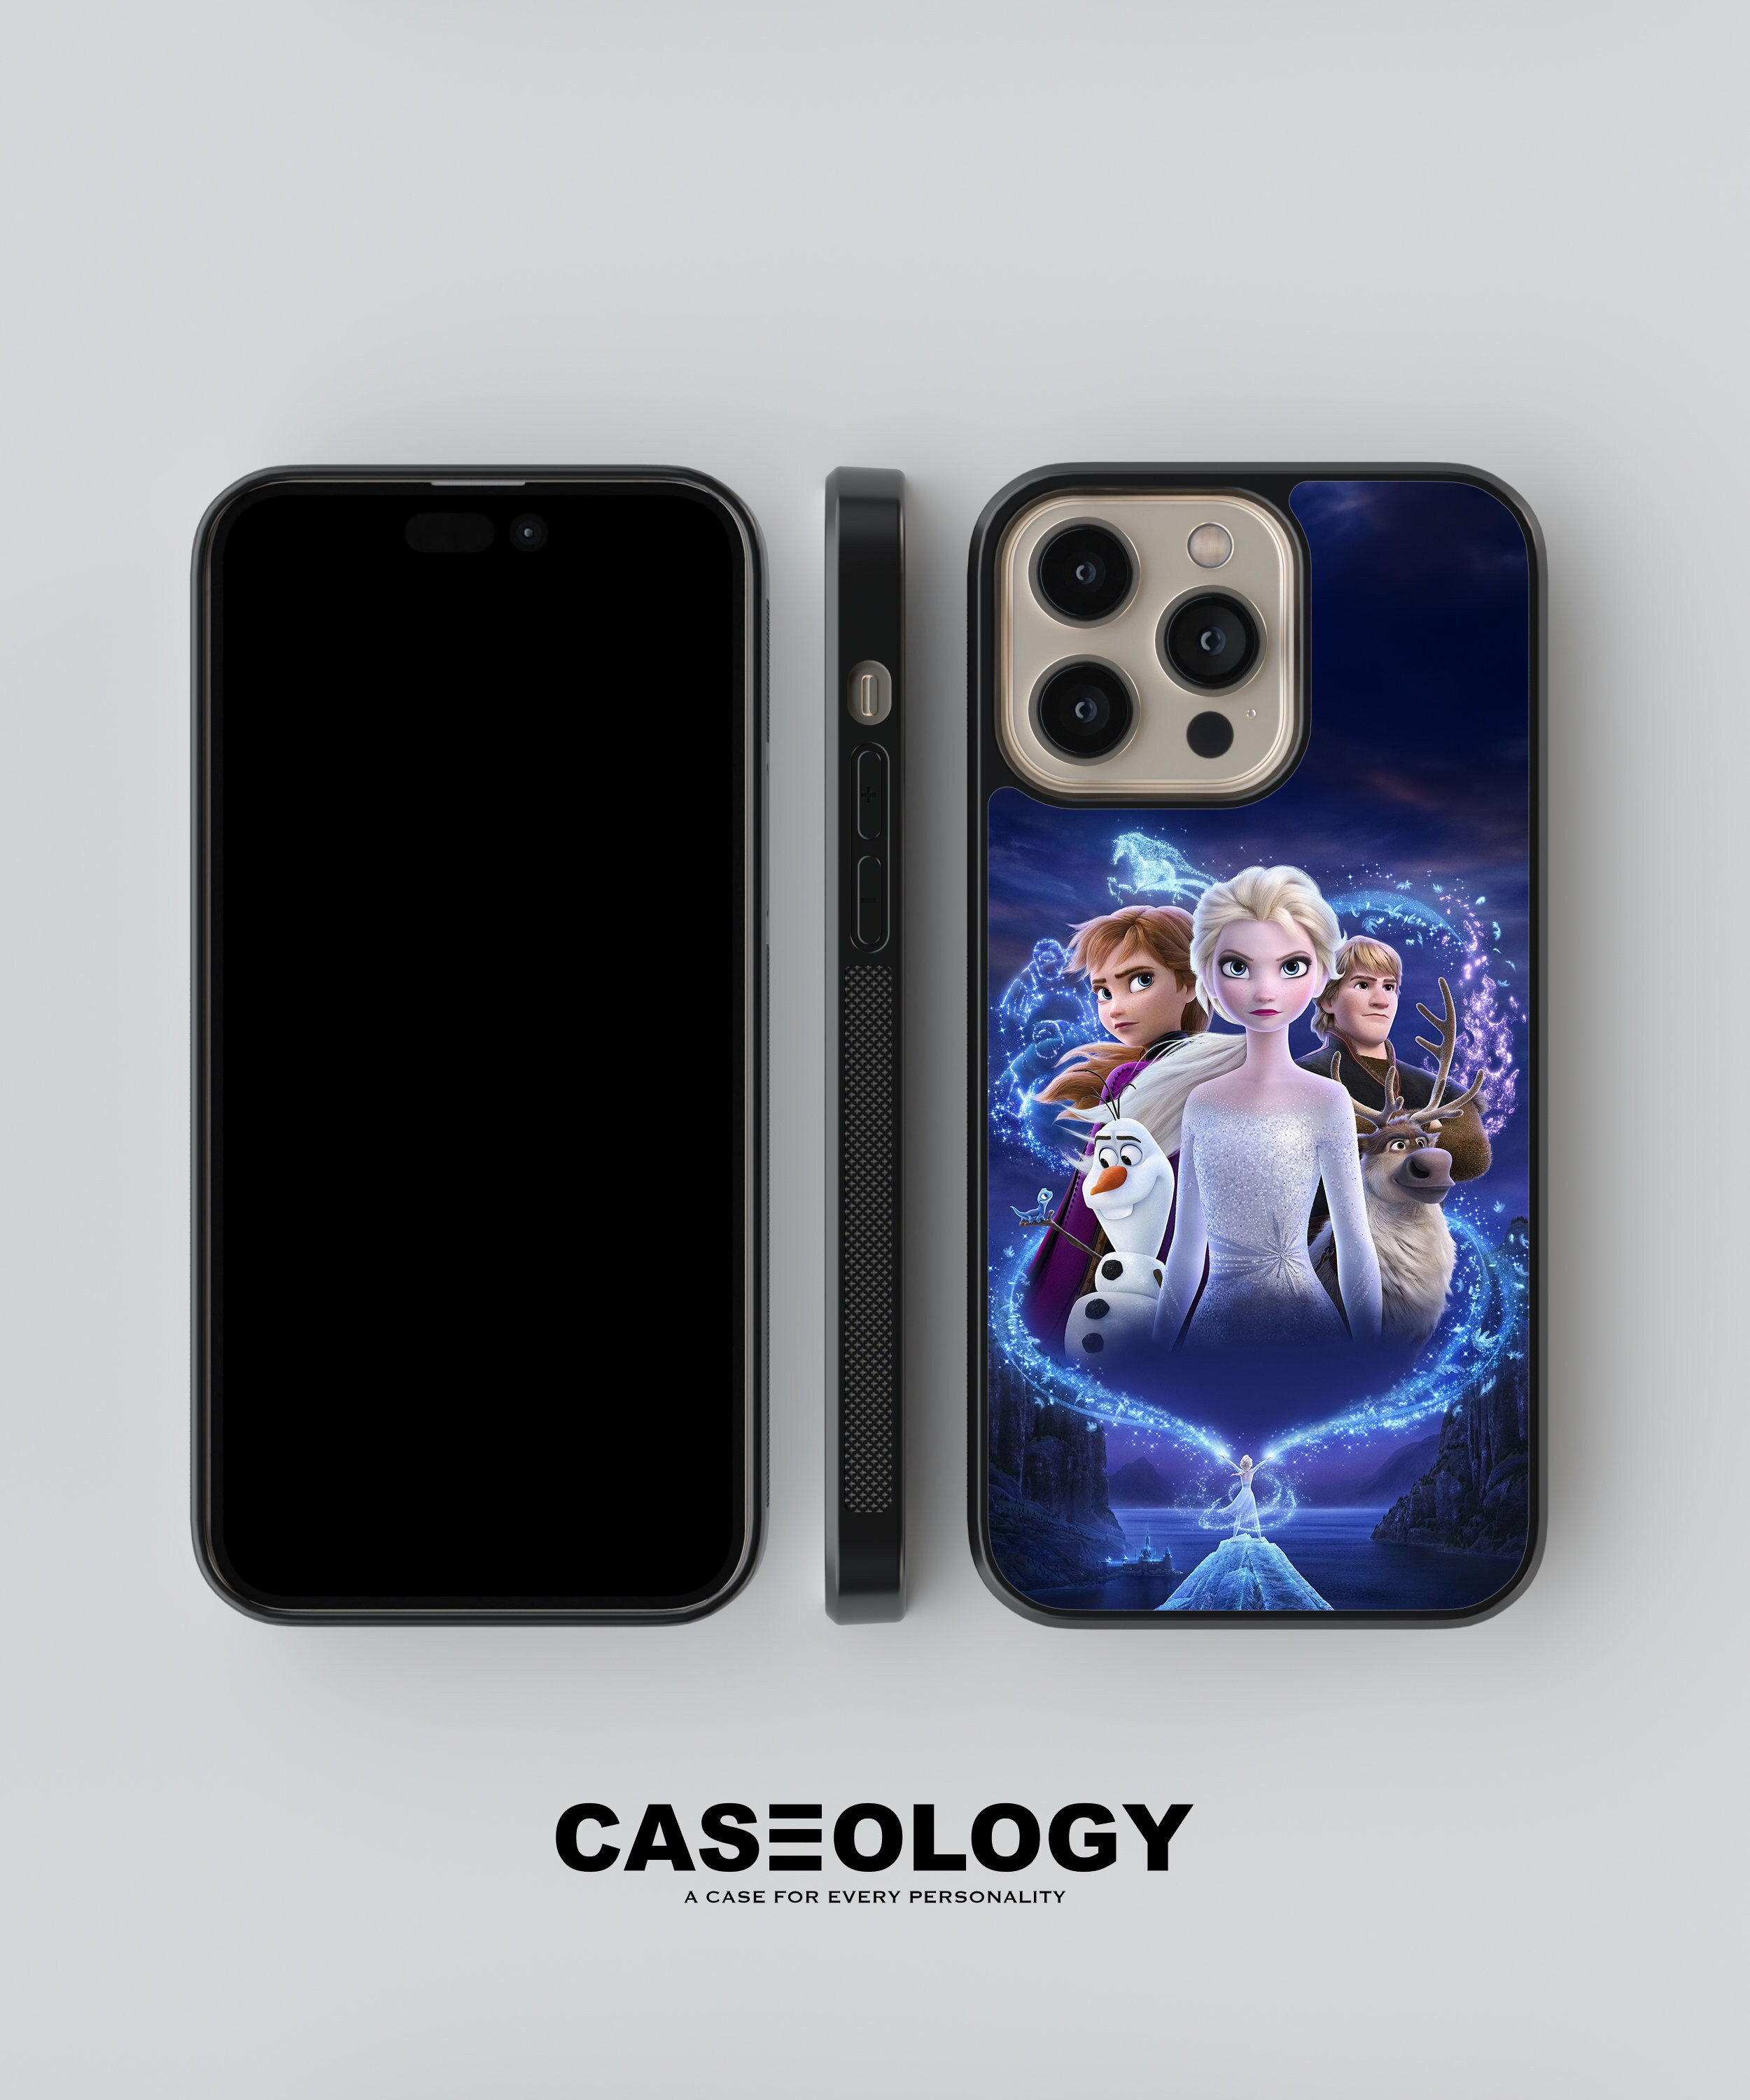 Frozen Water Resistant Stickers for Phone Cases Disney Sticker 